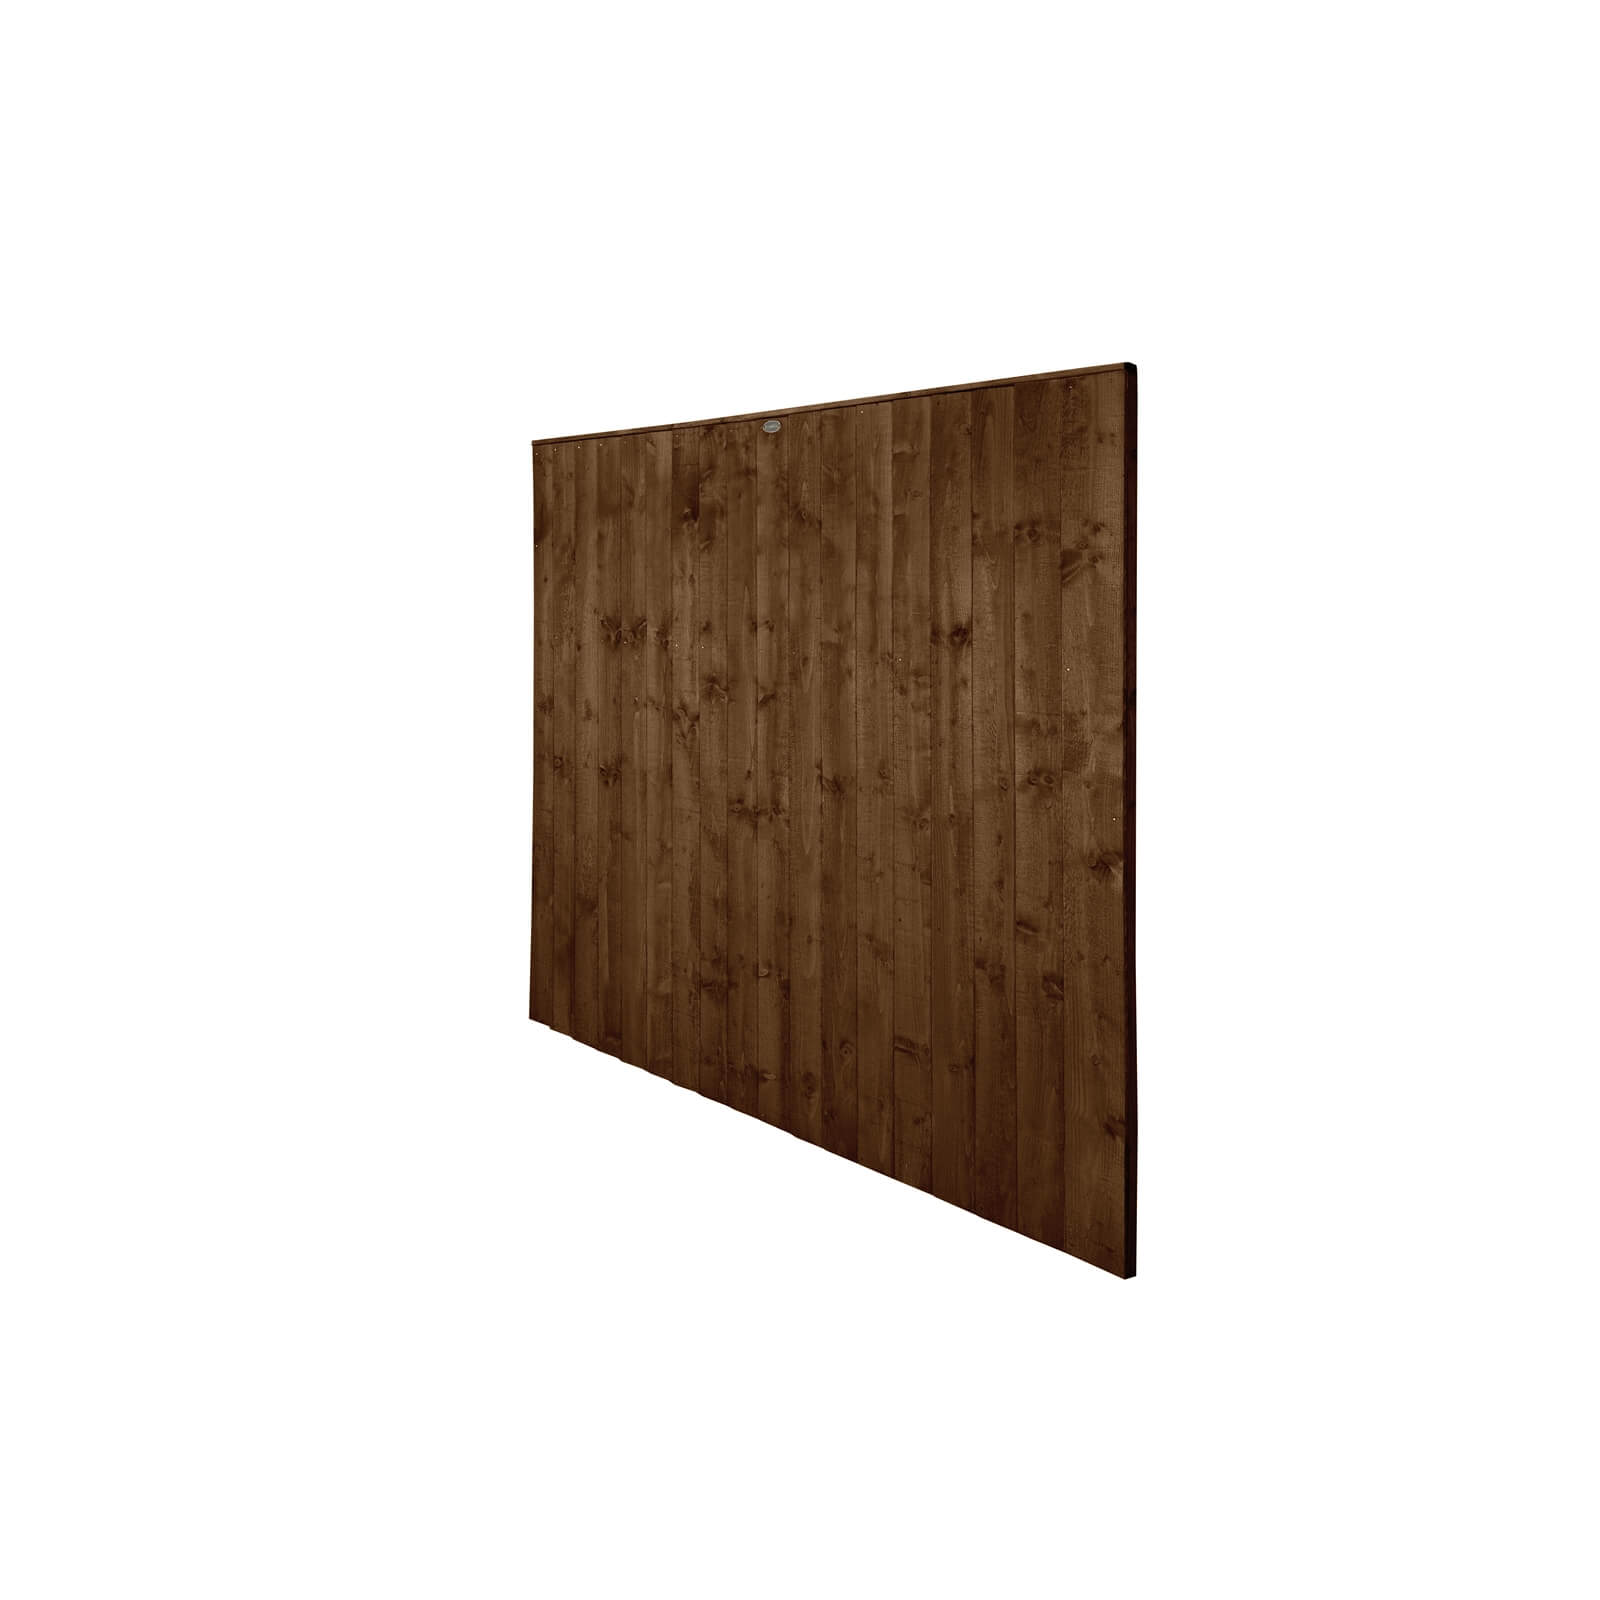 6ft x 6ft (1.83m x 1.85m) Pressure Treated Featheredge Fence Panel (Dark Brown) - Pack of 20